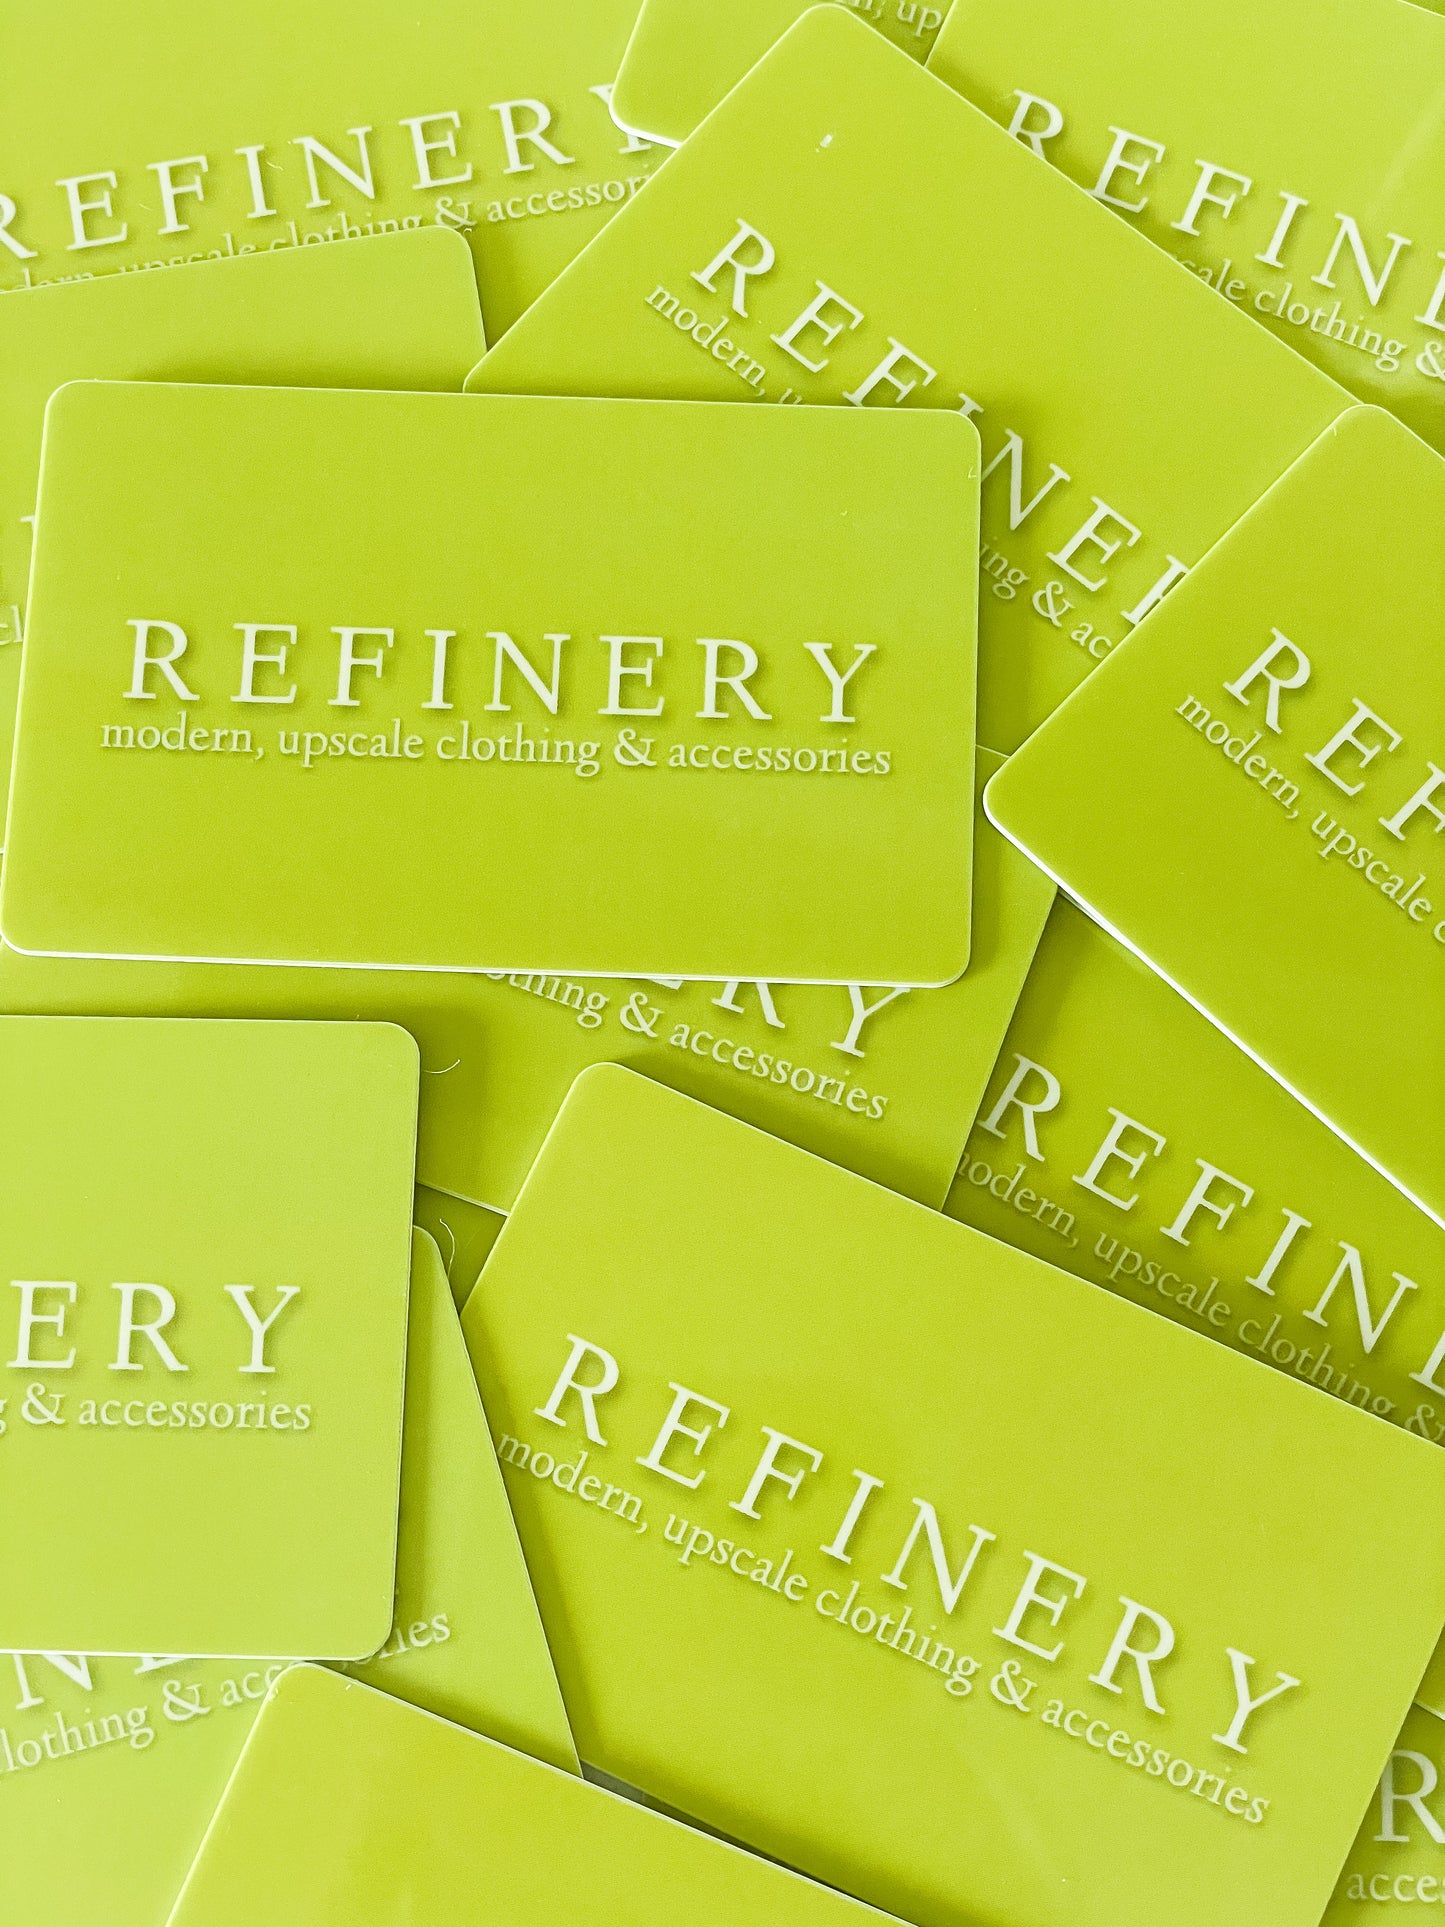 Refinery Giftcard